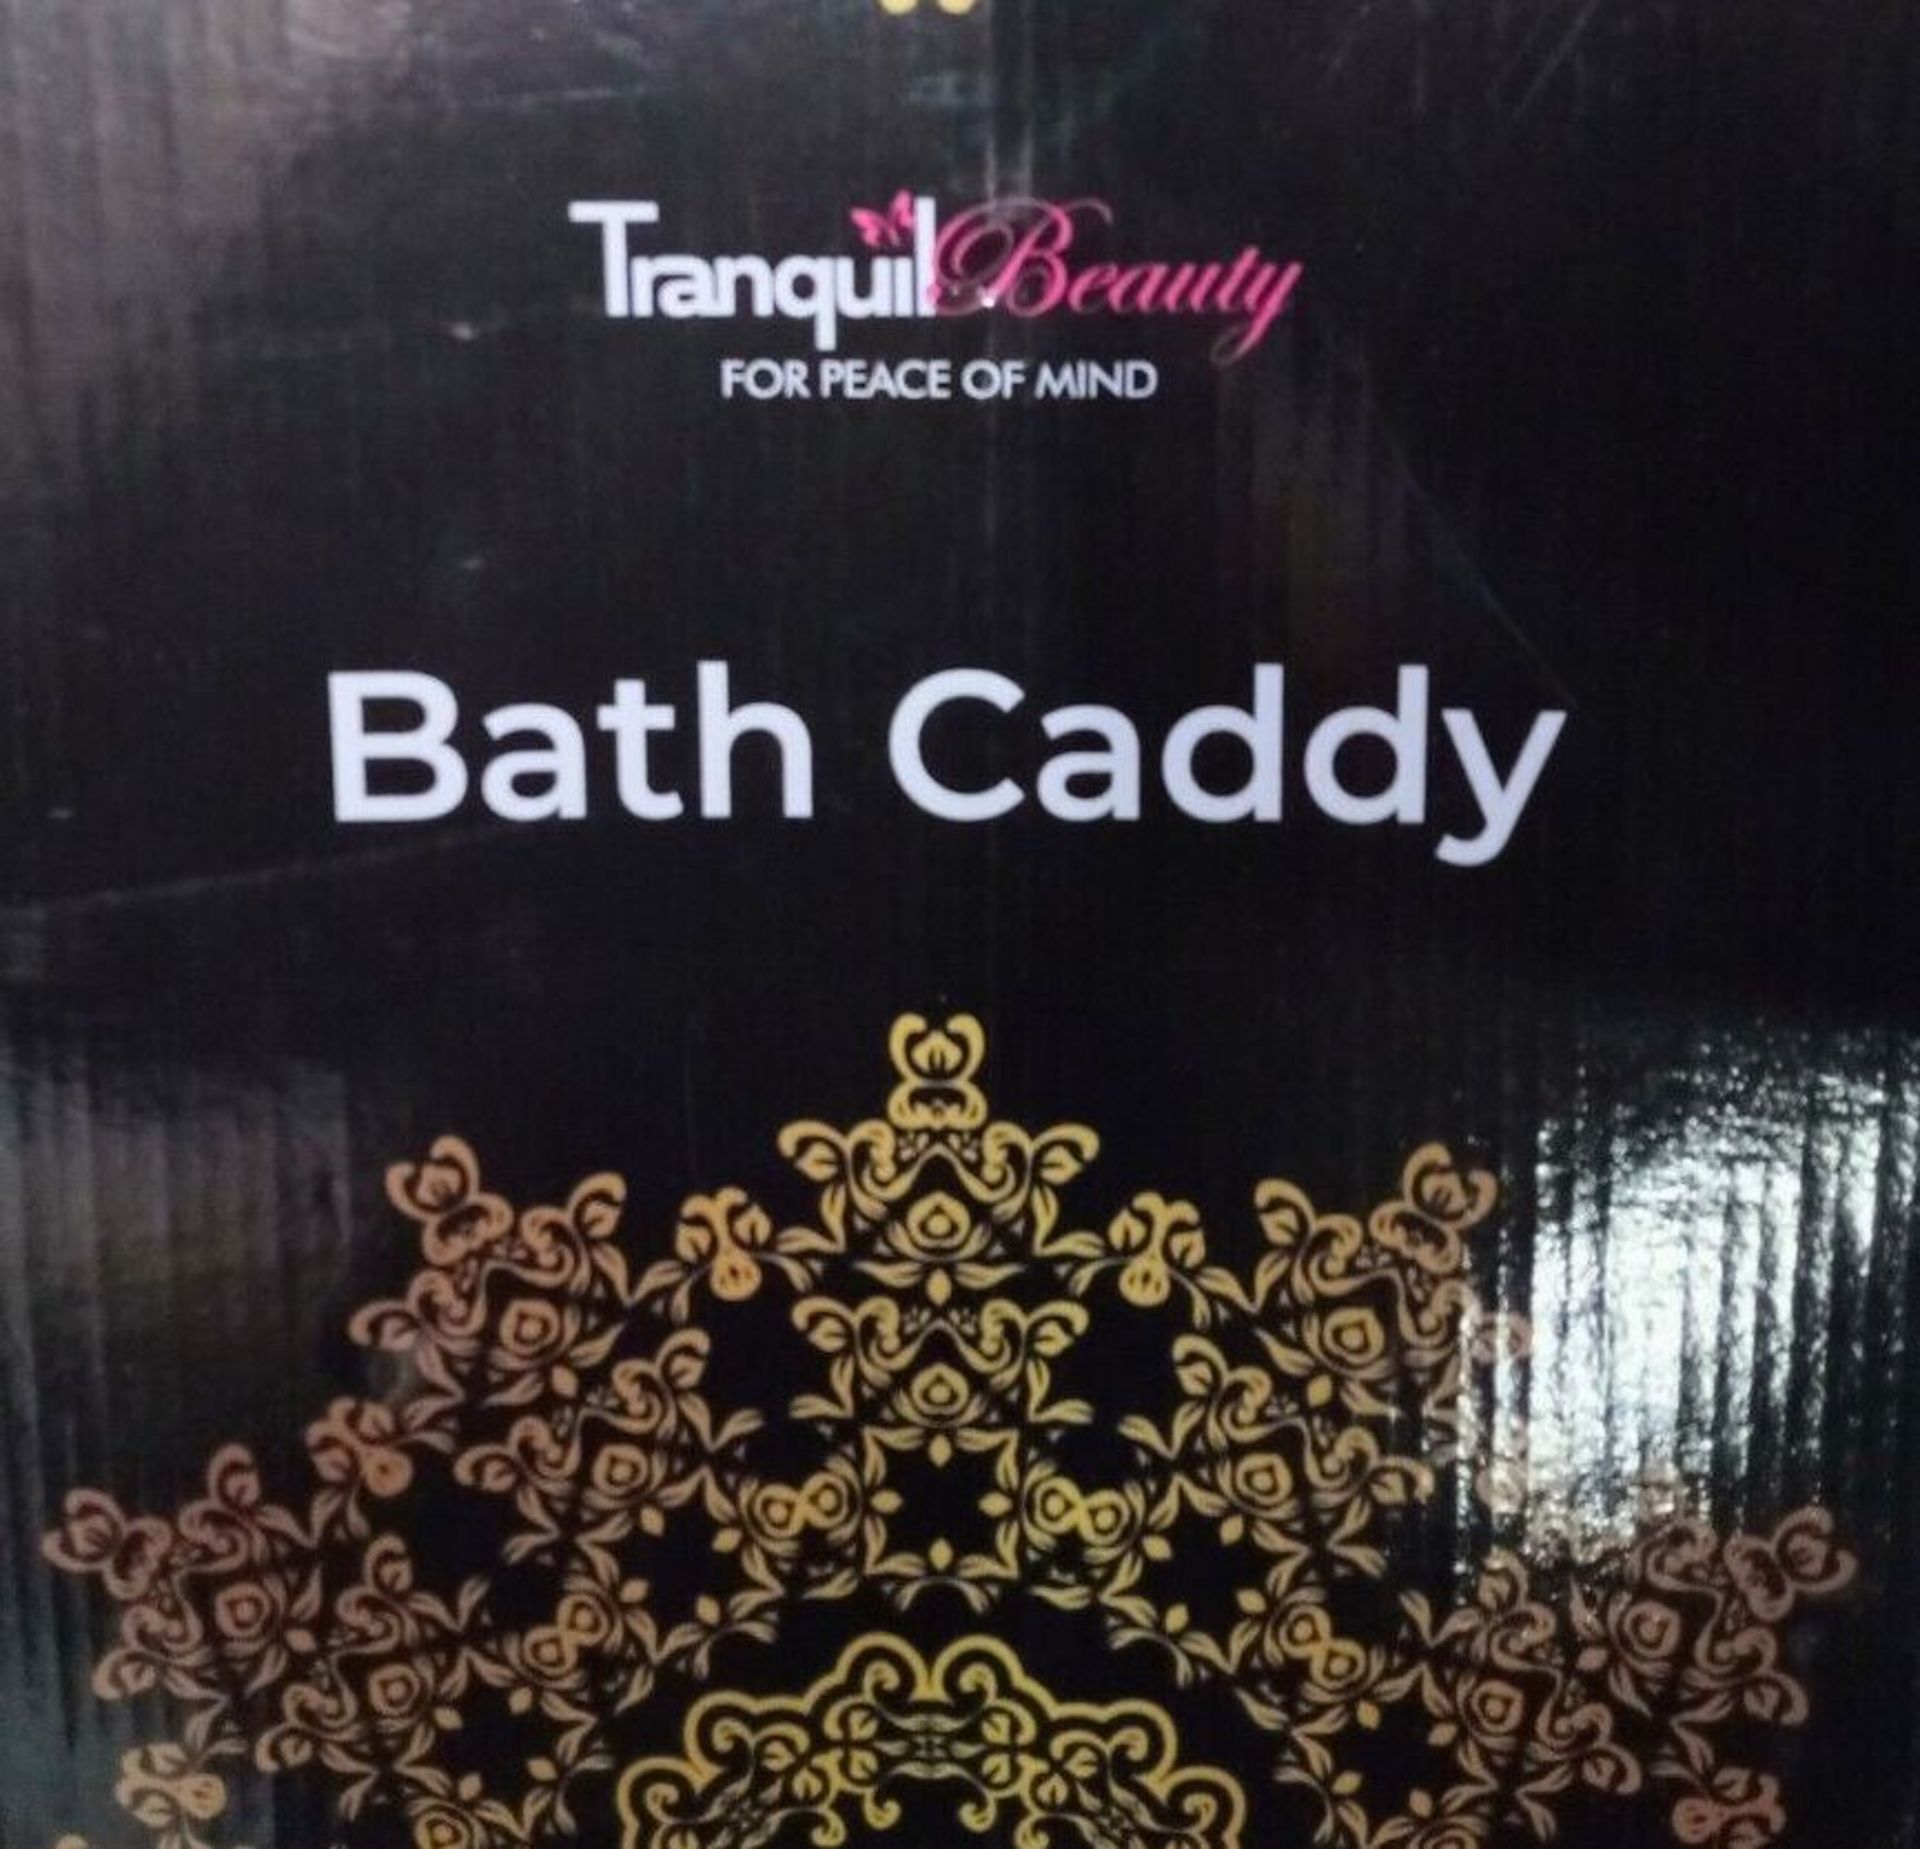 Tranquil Beauty Bath Caddy/Tray Natural Sustainable Bamboo - (NEW) - RRP Â£20+! - Image 7 of 10